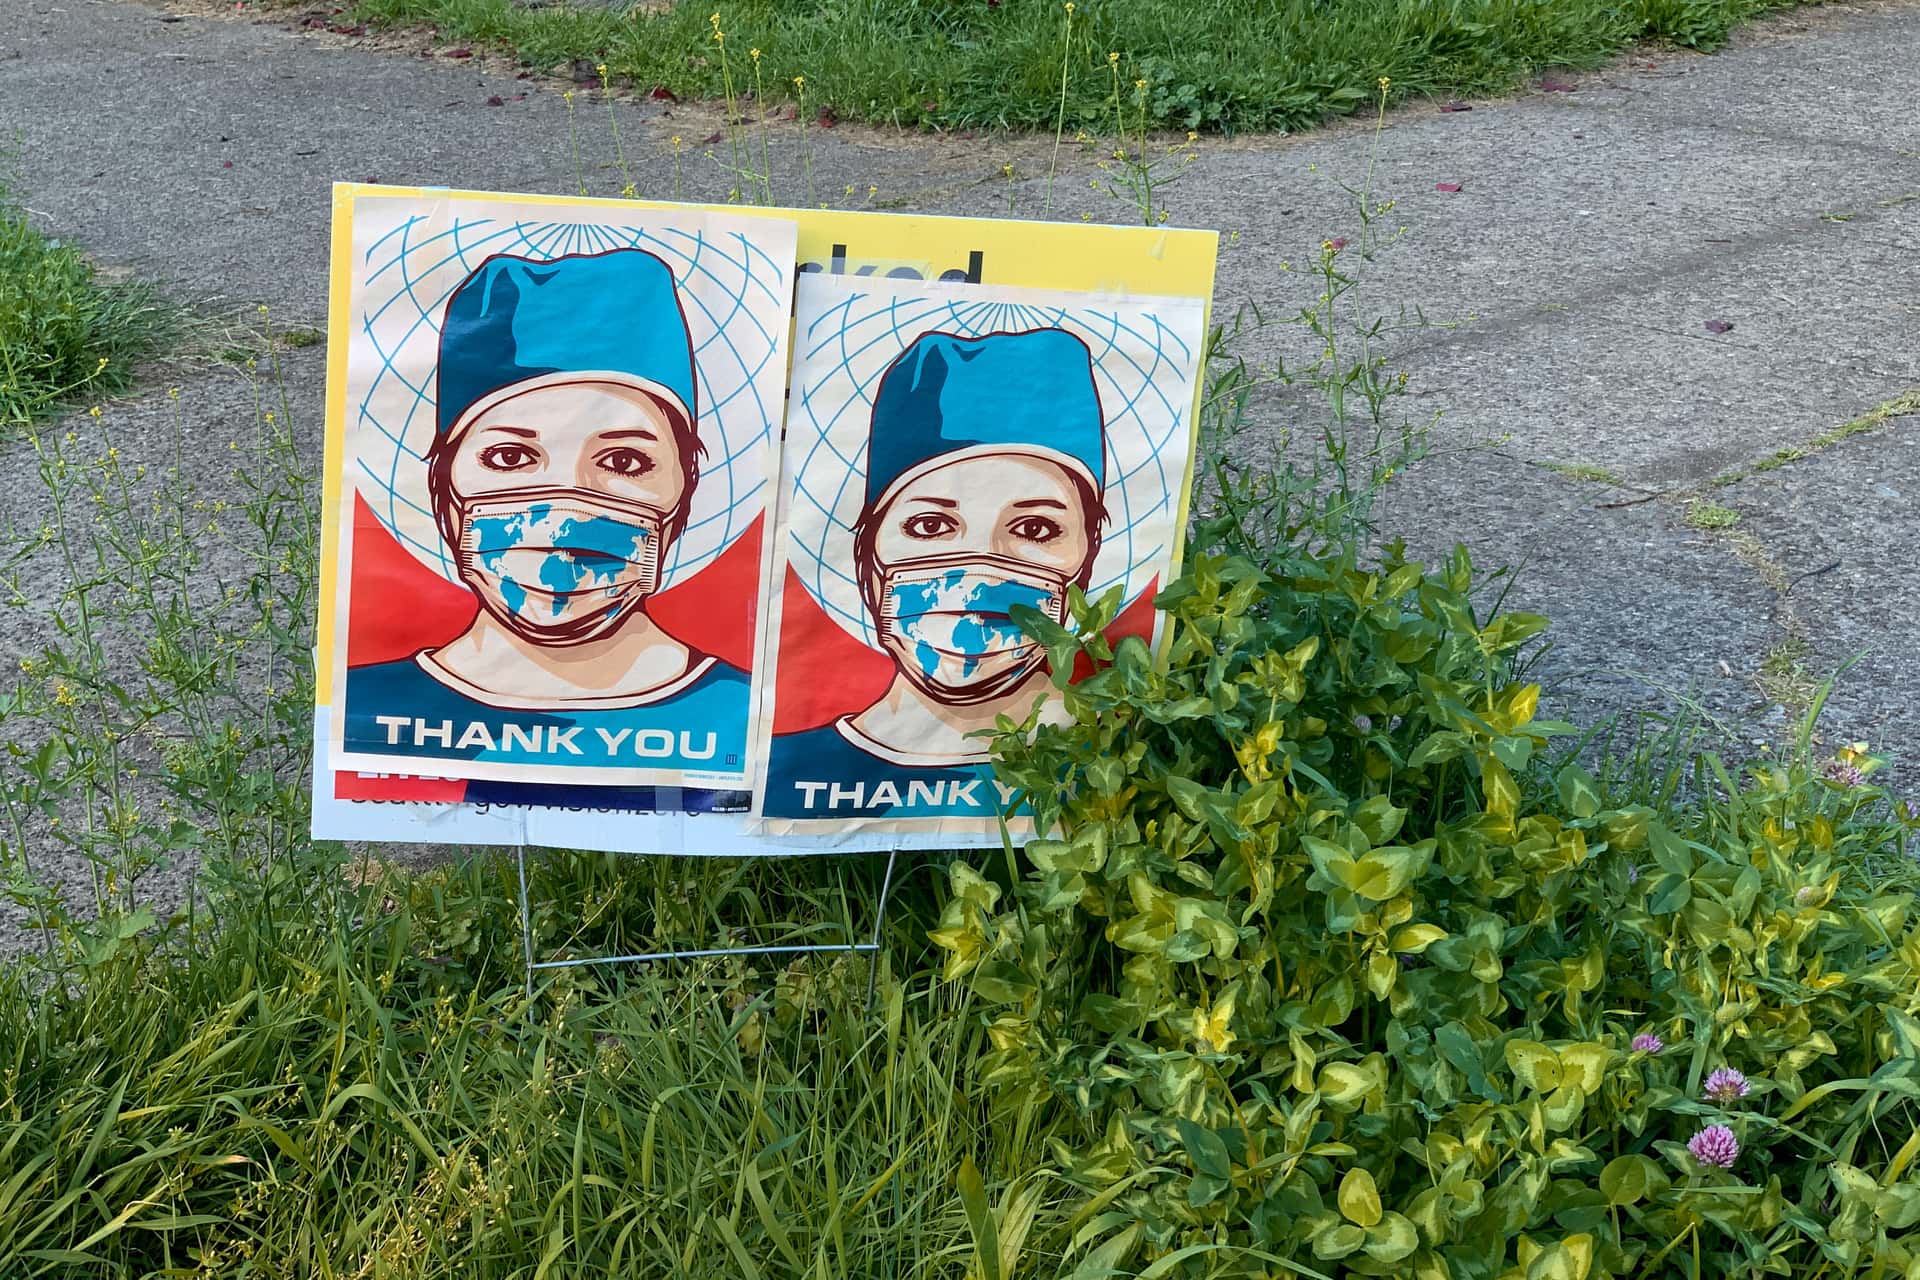 yard sign saying “Thank You” below an illustration of a medical worker wearing a face mask stylized as the earth